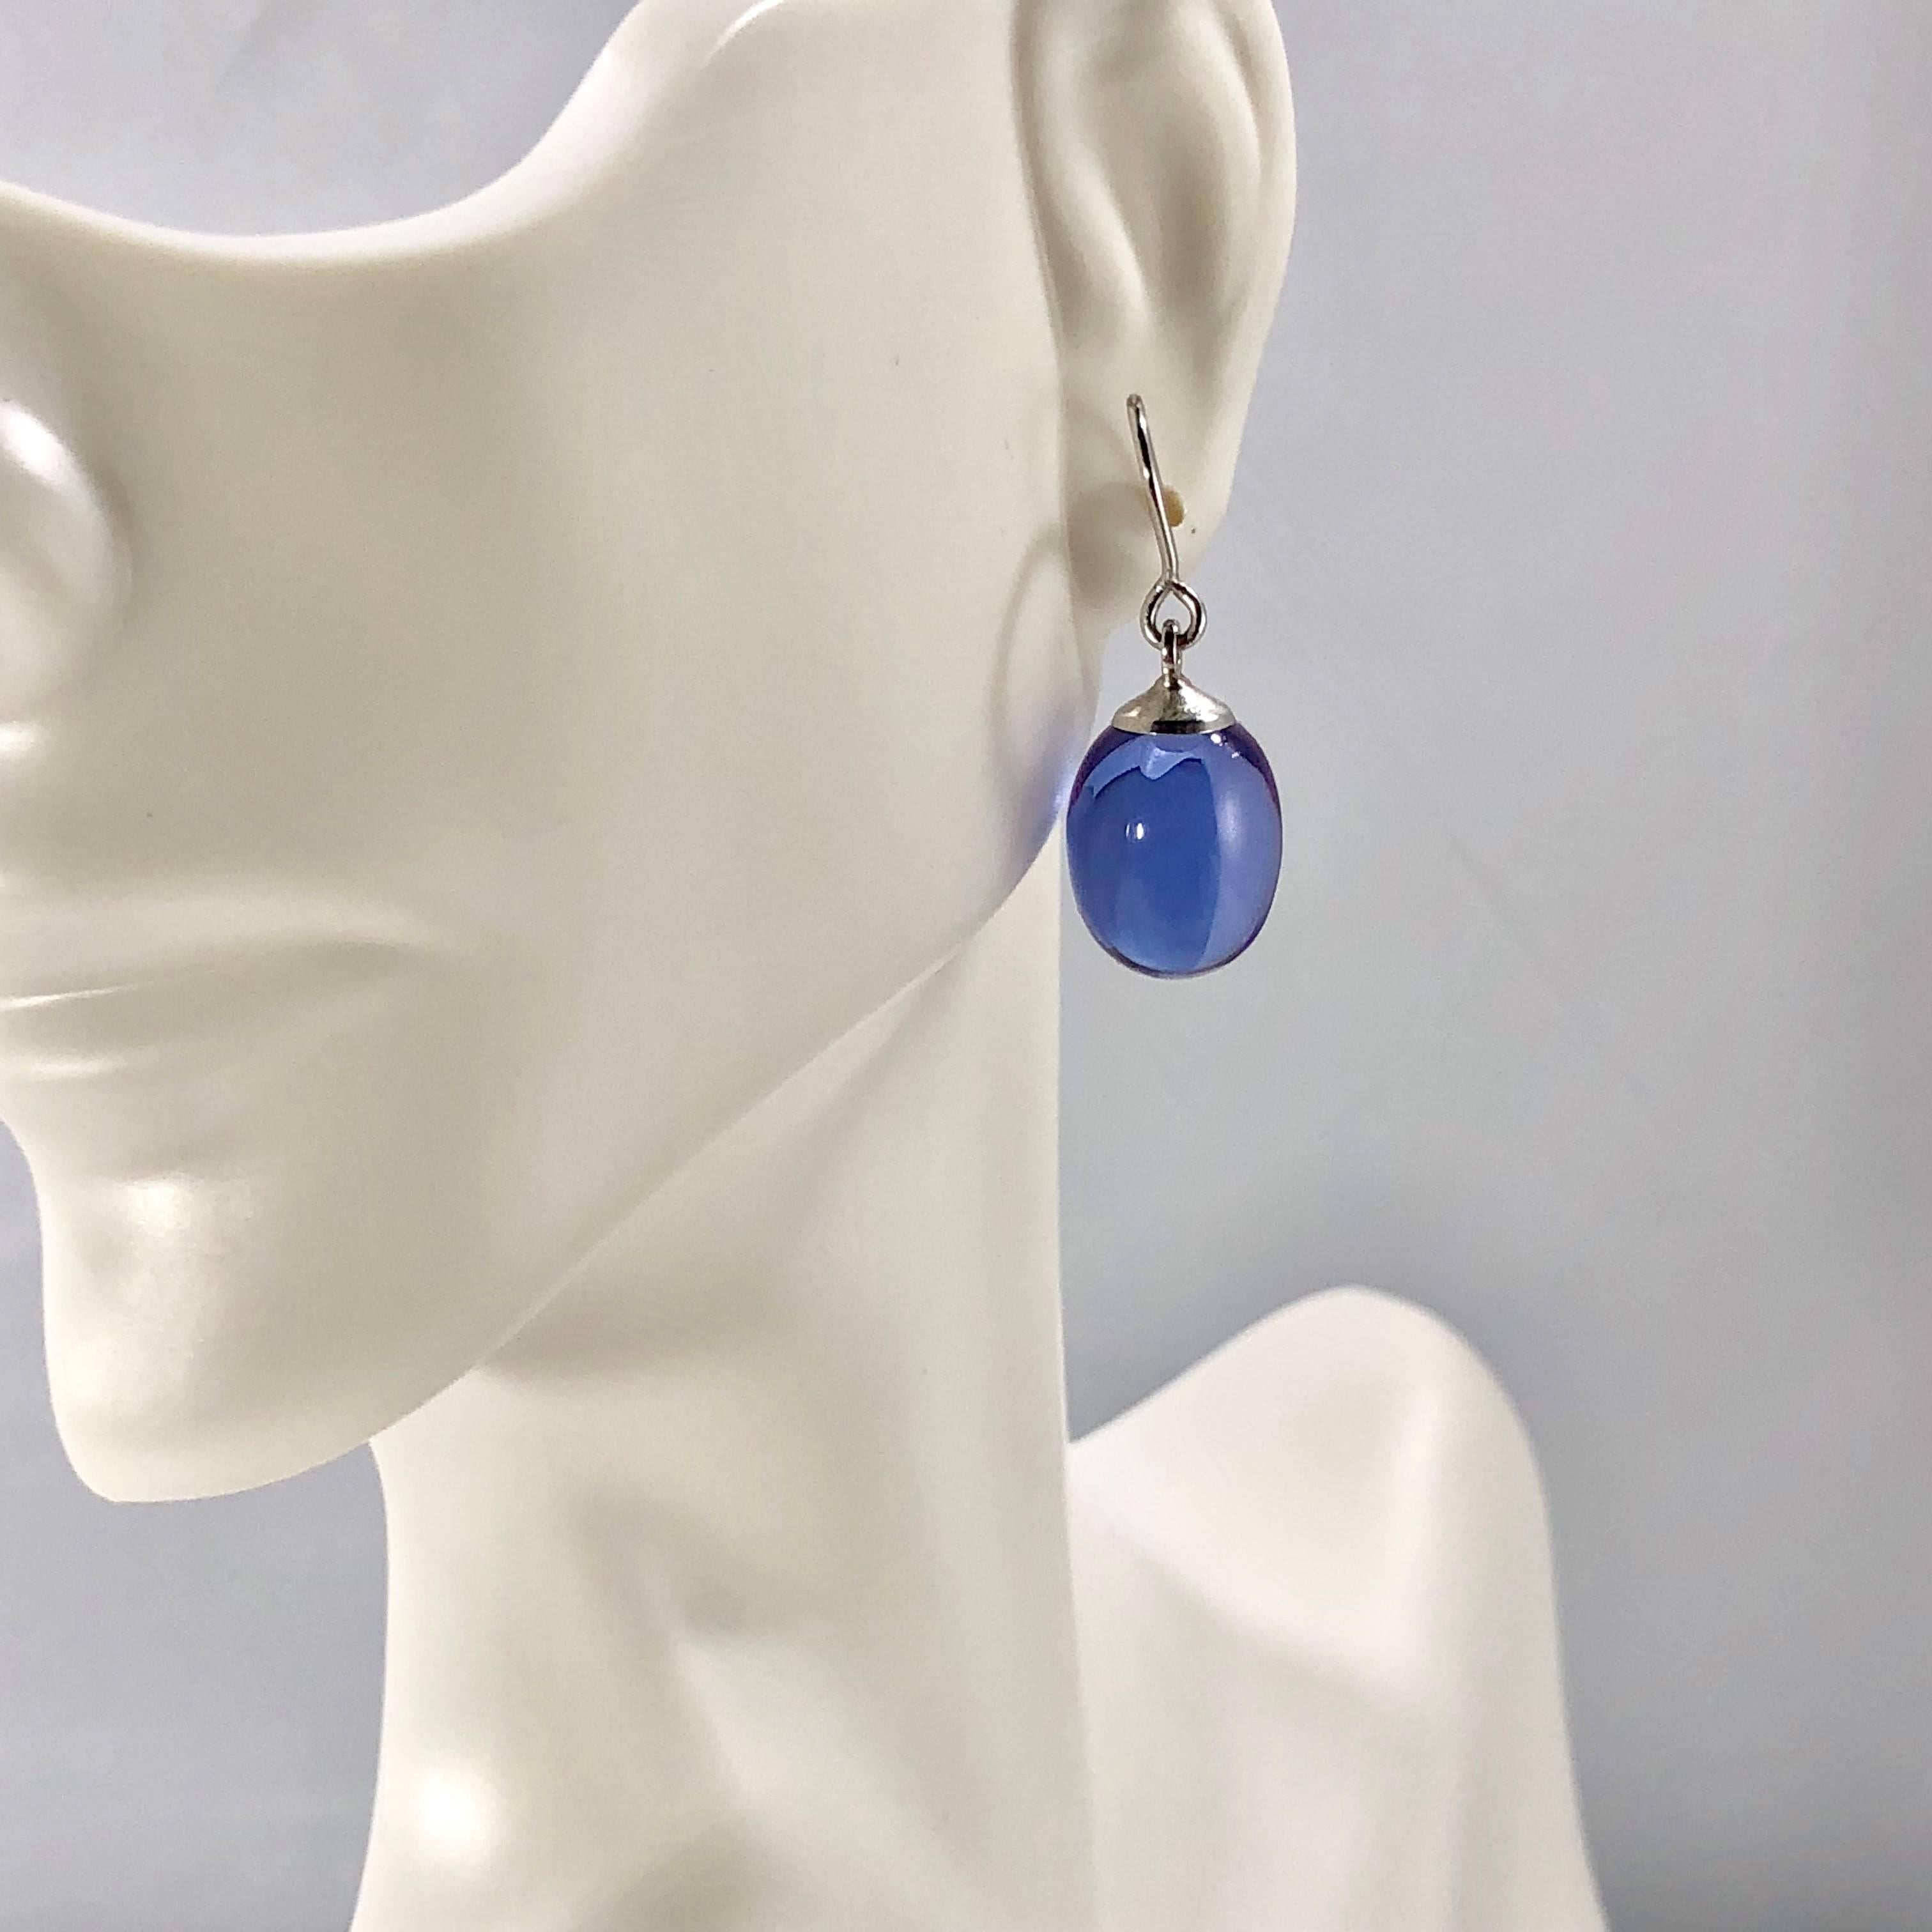 Baccarat crystal and sterling silver blue iridescent drop earrings. Baccarat French luxury brand and world leader in fine crystal authentic drop earrings. Created in a most beautiful iridescent Blue crystal, bright polished, oval drop shape for cut.